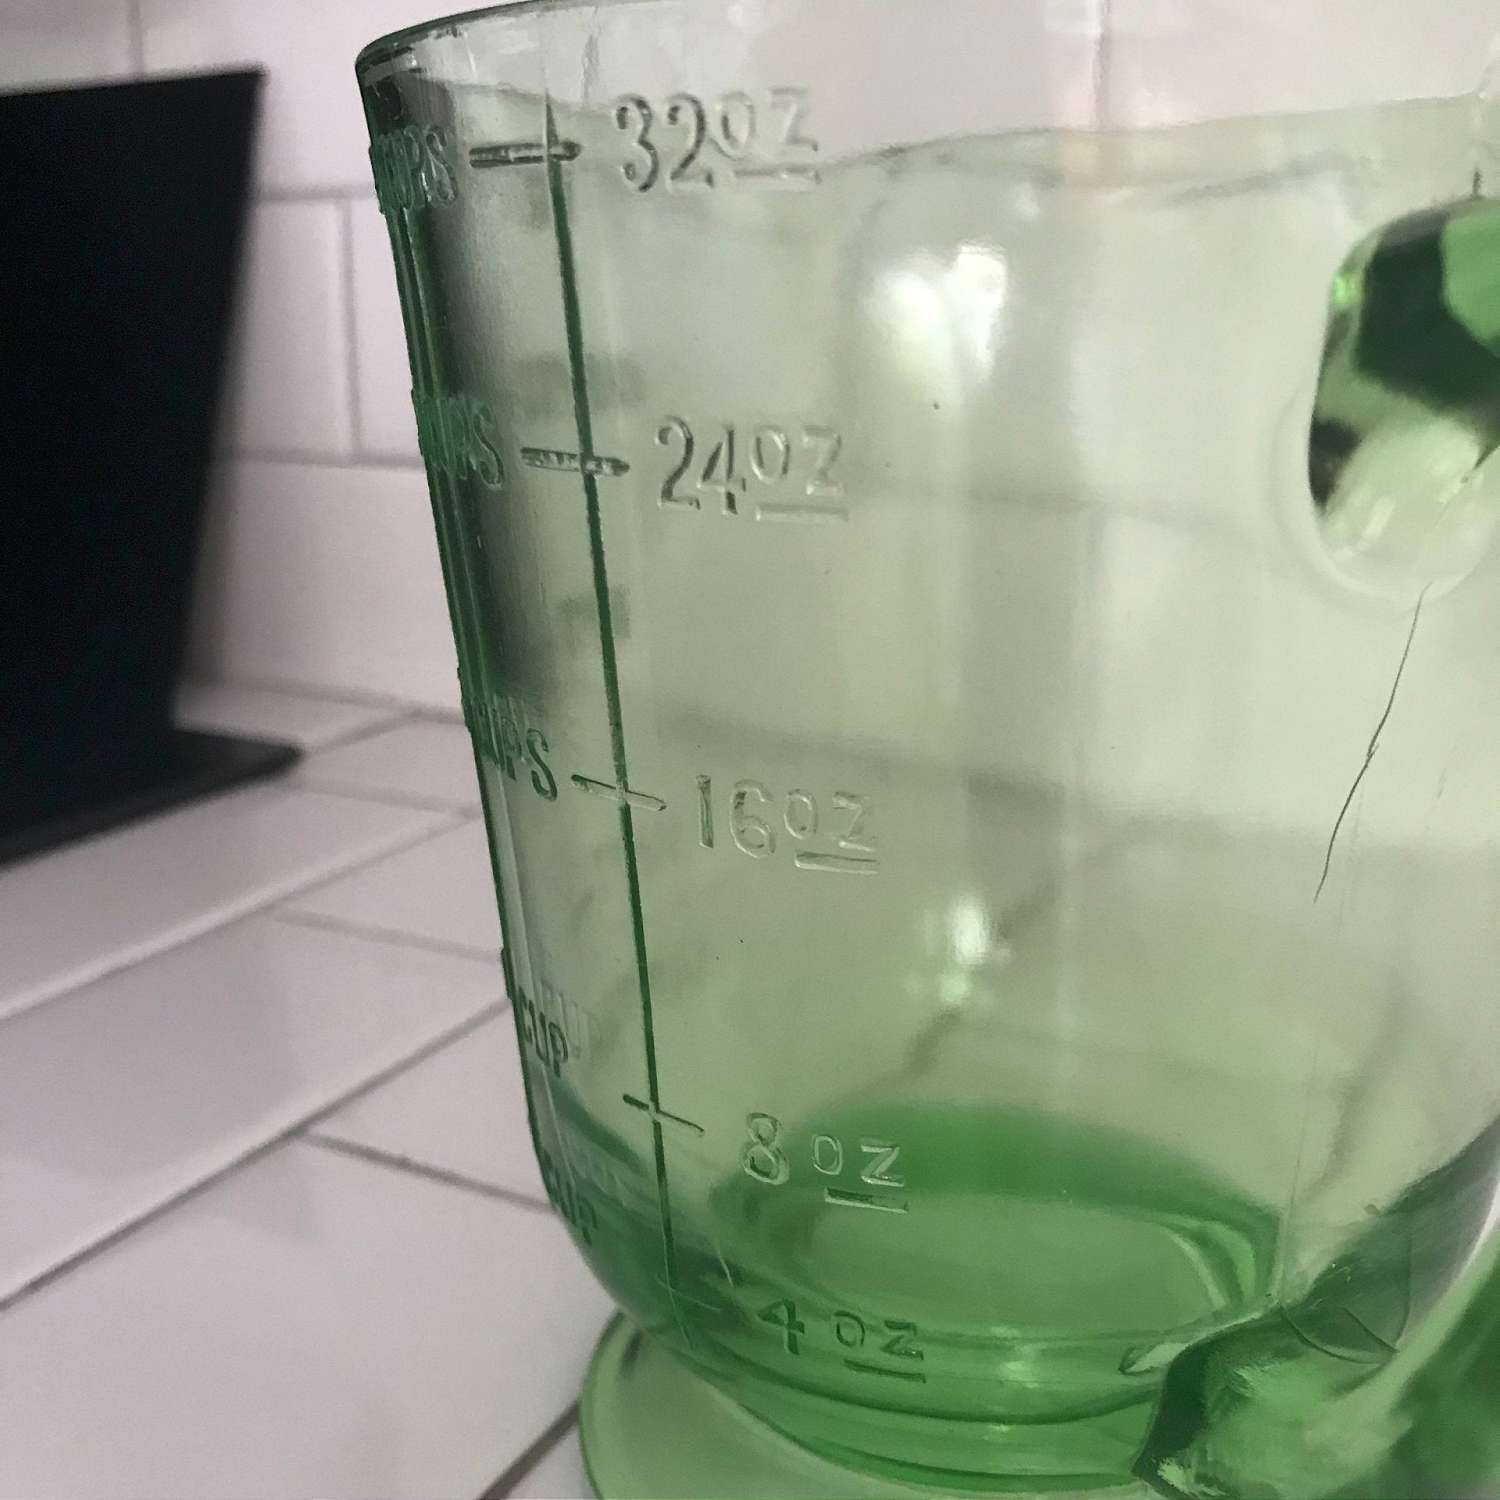 https://www.truevintageantiques.com/wp-content/uploads/2019/12/antique-uranium-glass-measuring-cup-4-cups-green-kitchen-collectible-display-farmhouse-glows-green-5df1795d9-scaled.jpg